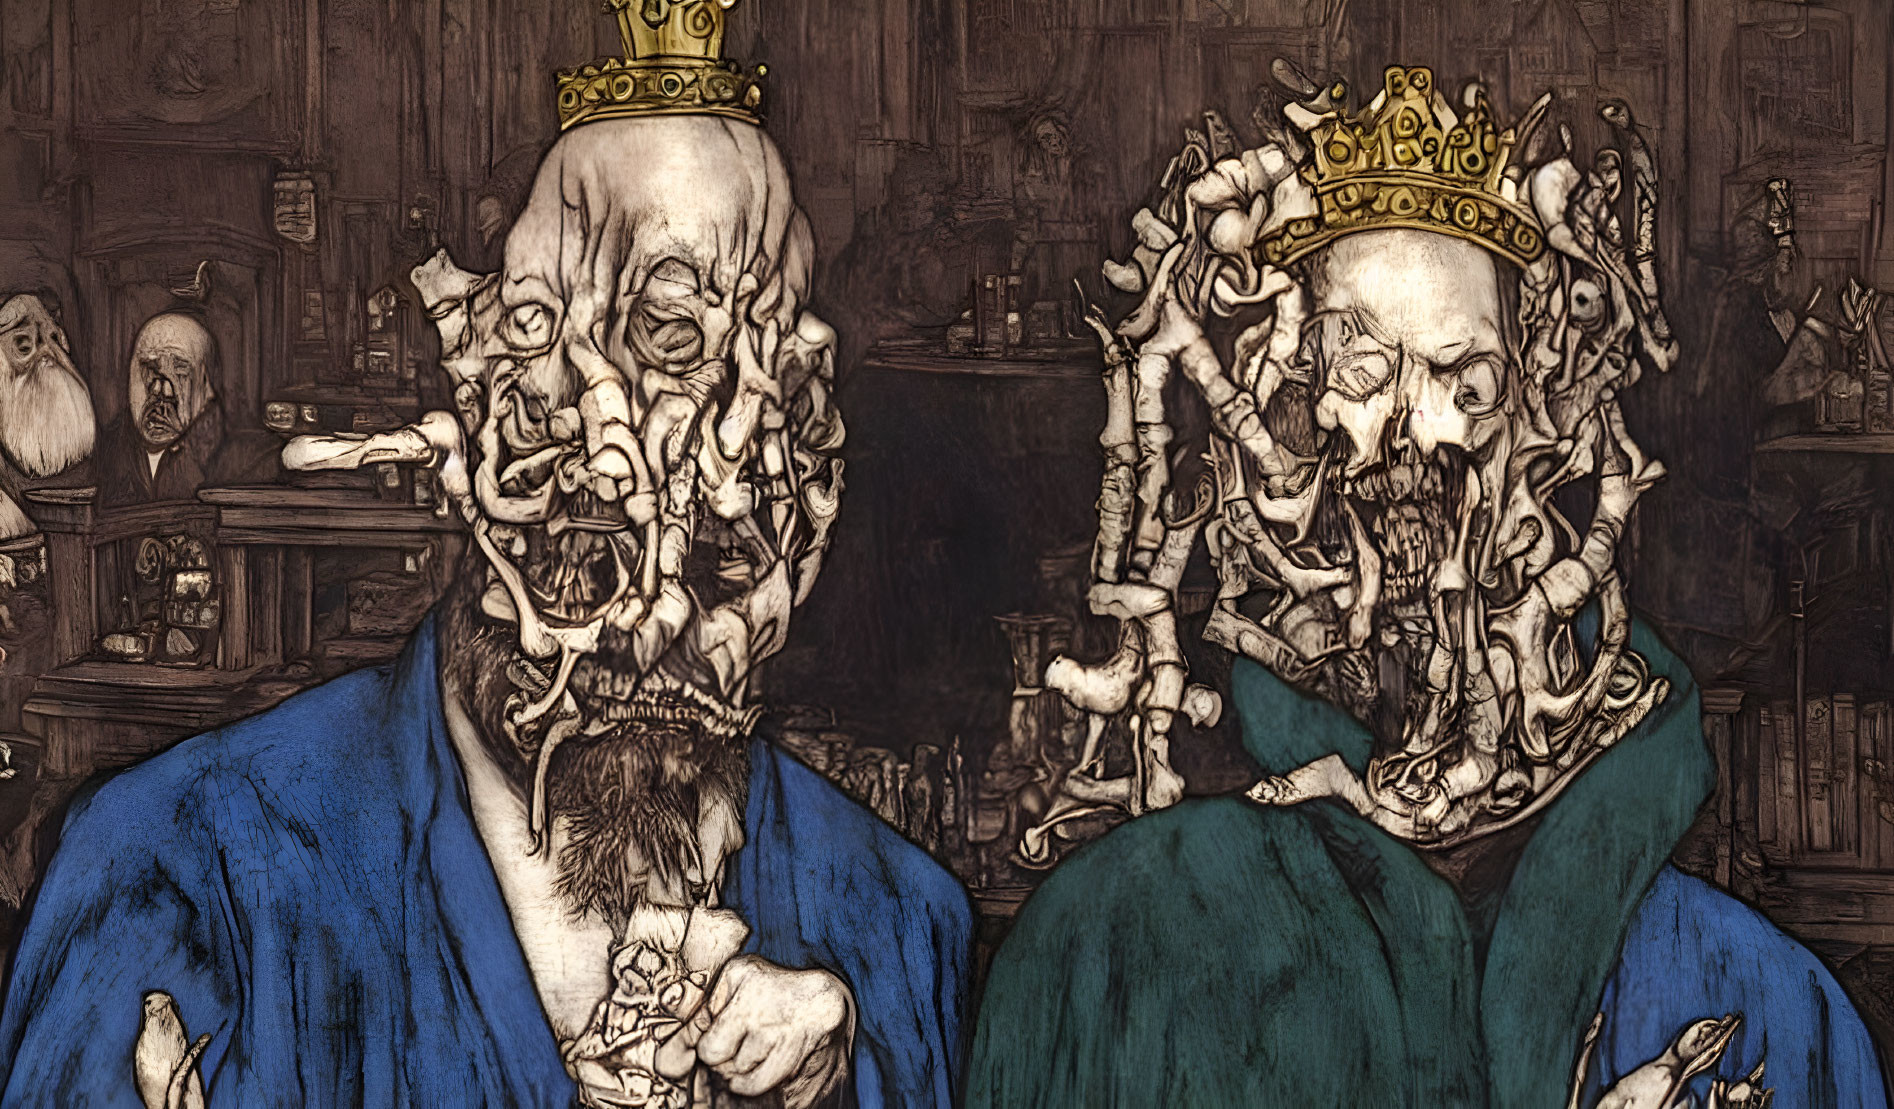 Skeletal figures in royal attire with intricate face designs conversing in a room